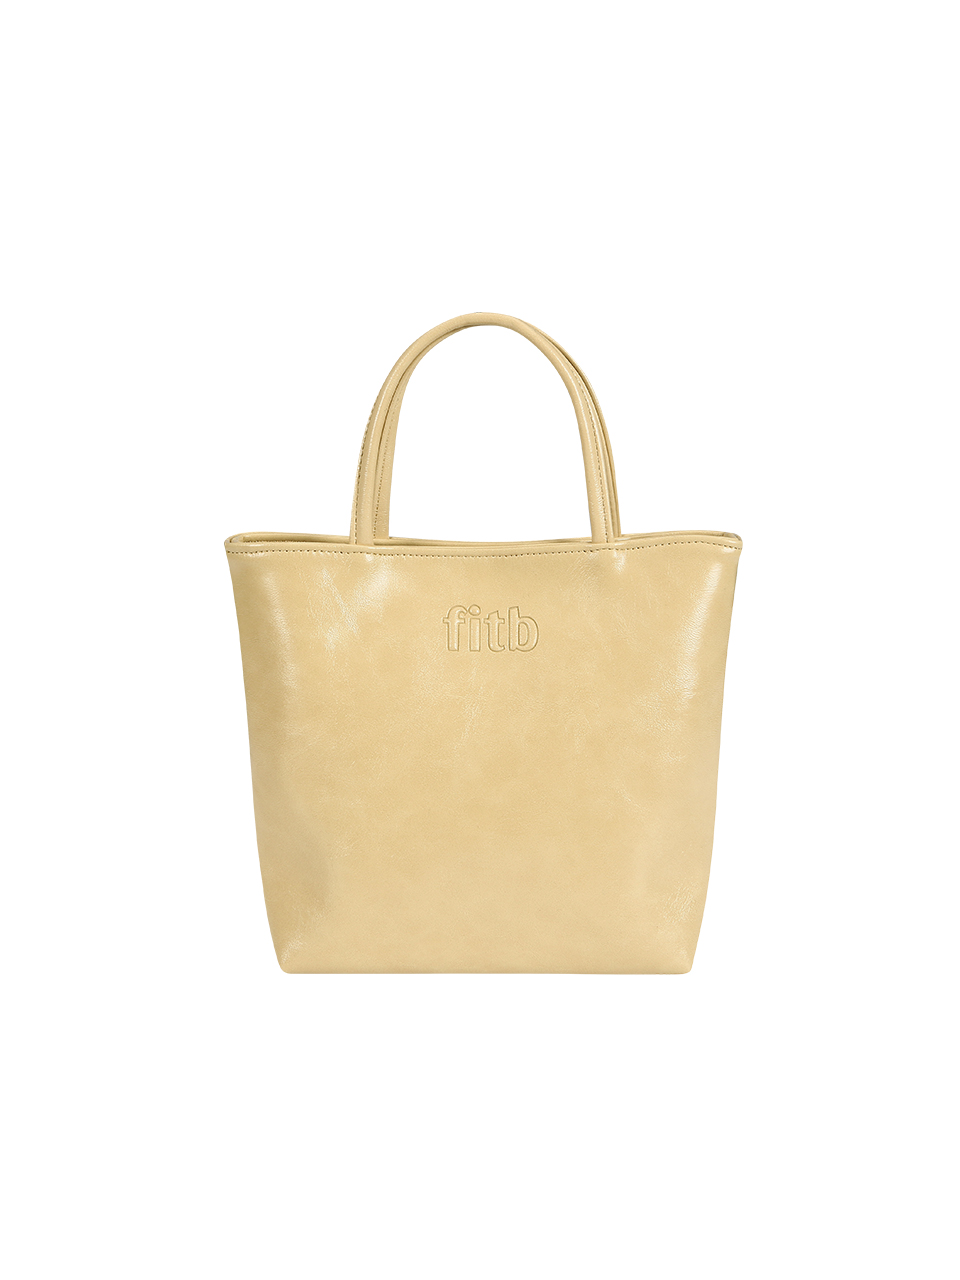 Sunday Tote Bag (butter)